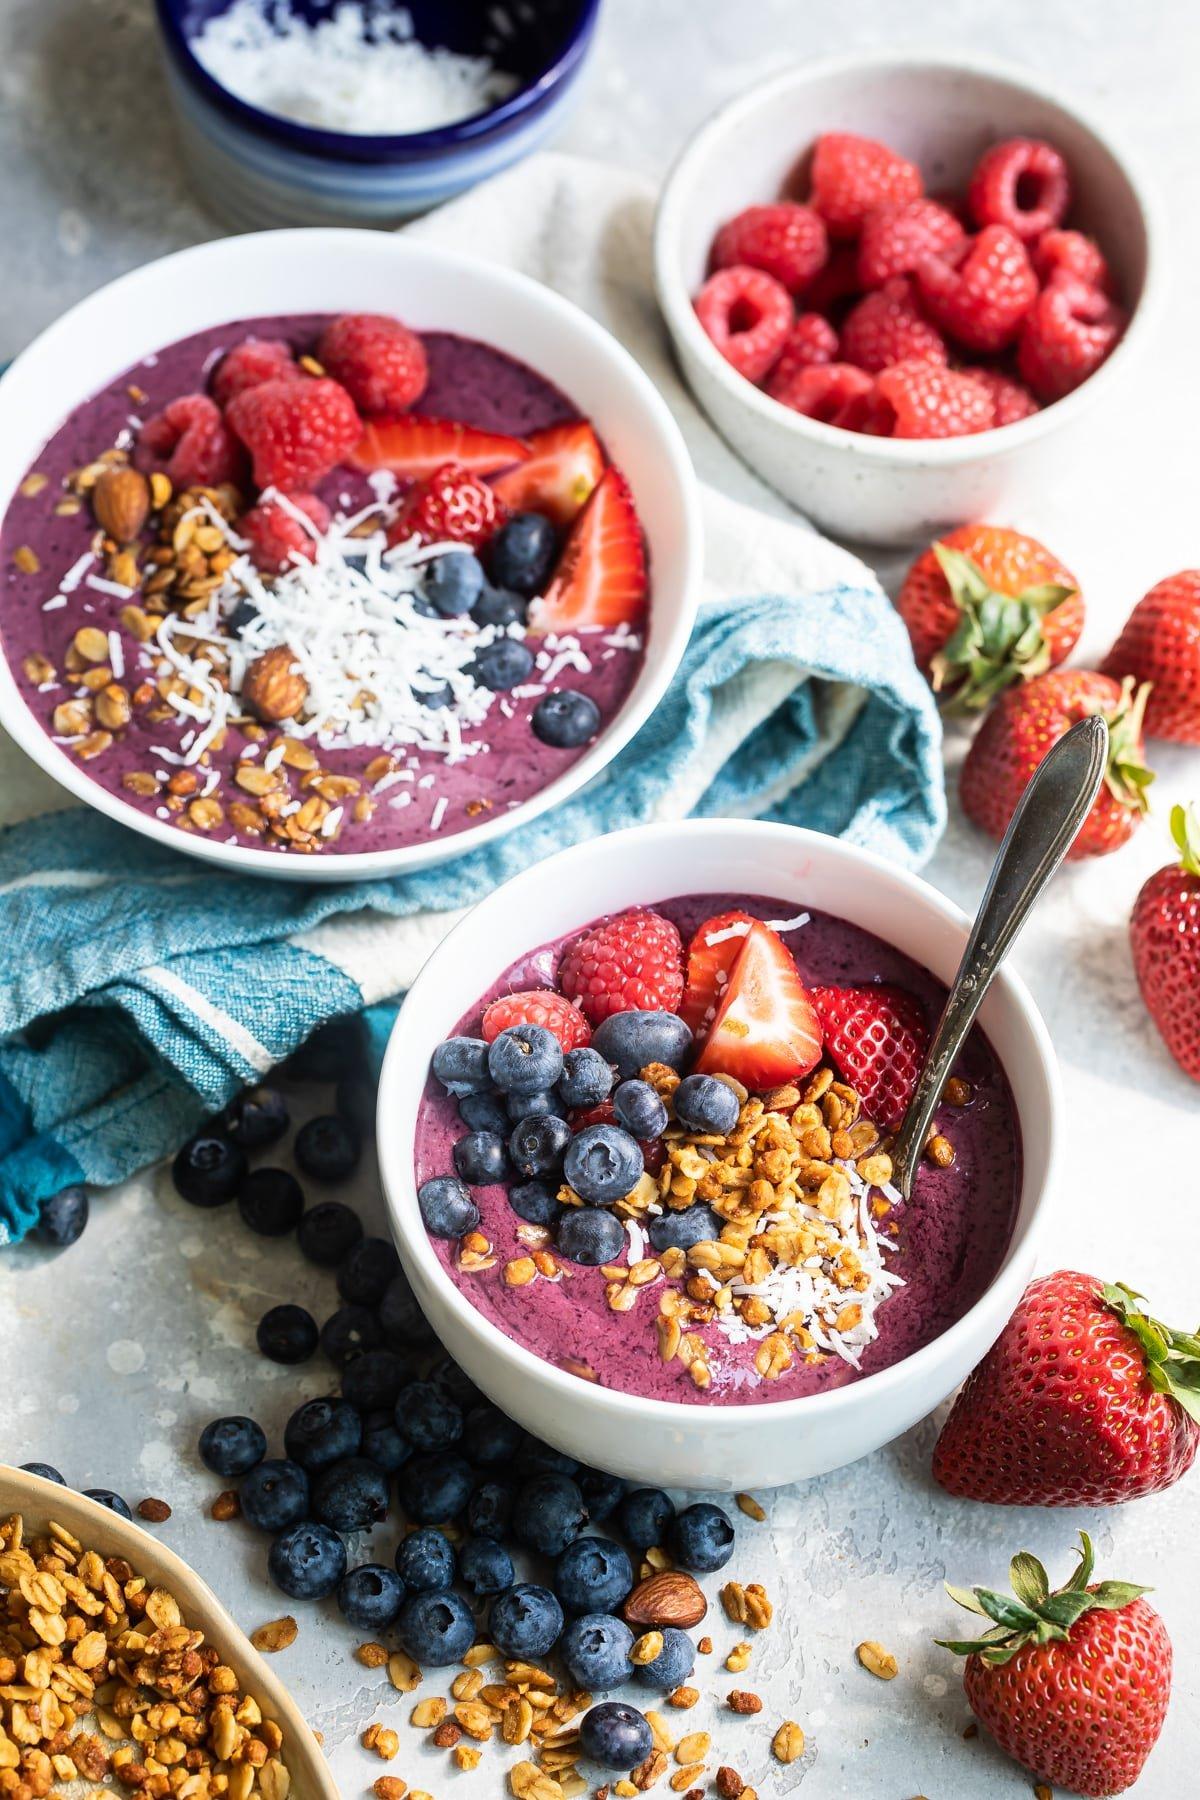 With just five ingredients — apple juice, banana, frozen berries, Greek yogurt, and frozen acai purée — this acai bowl can be whipped up in a blender in minutes. (via <a href="https://www.culinaryhill.com/easy-acai-bowl-recipe/"><strong>Culinary Hill</strong></a>)